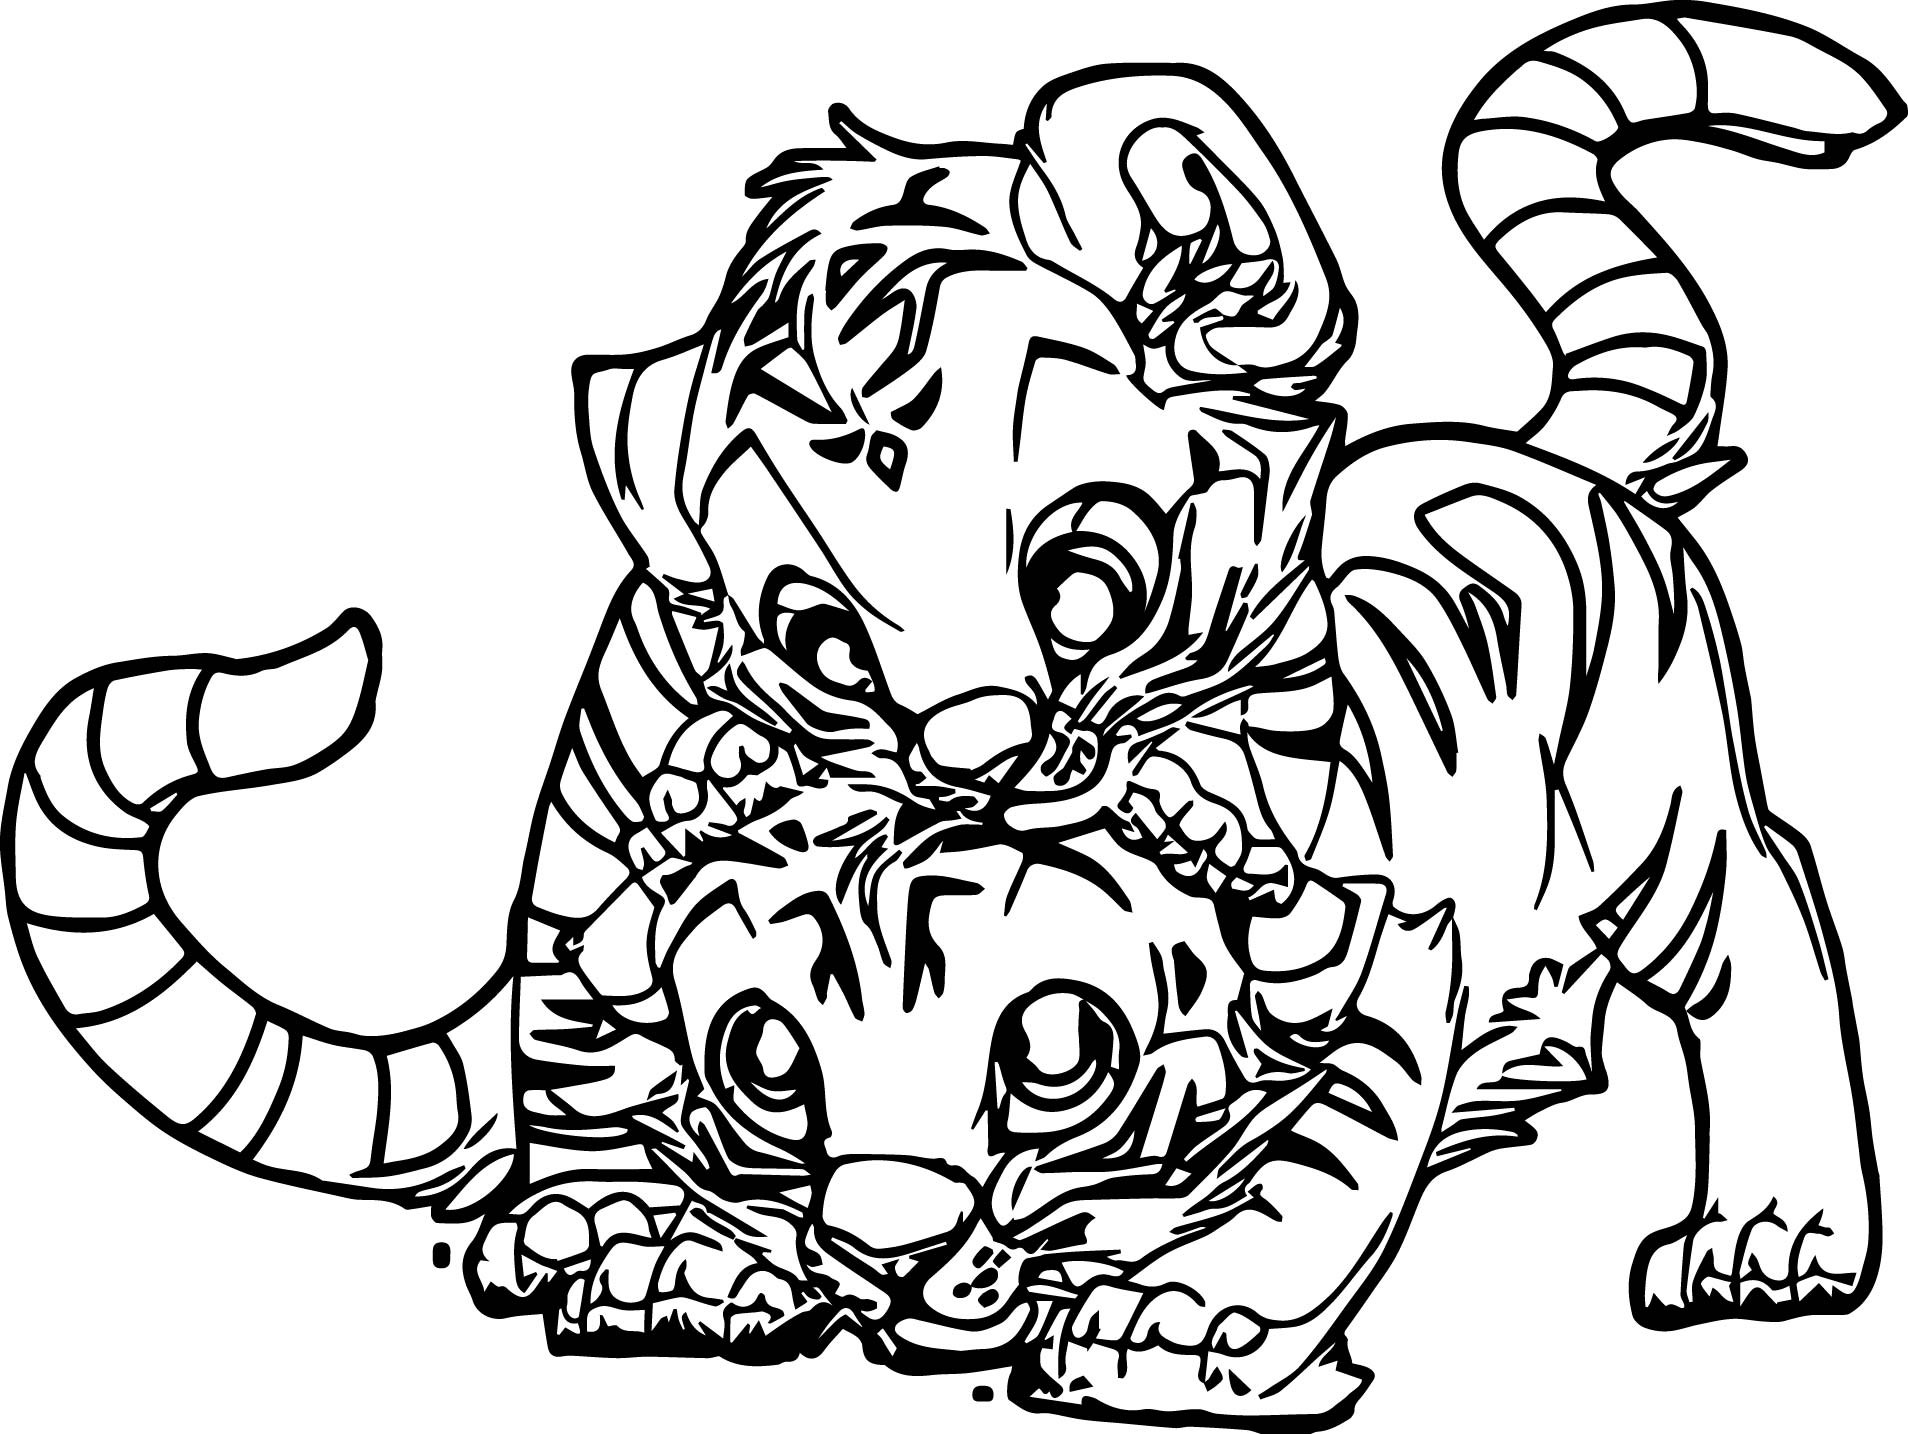 Baby Tigers Coloring Pages
 Two Baby Tiger Coloring Page